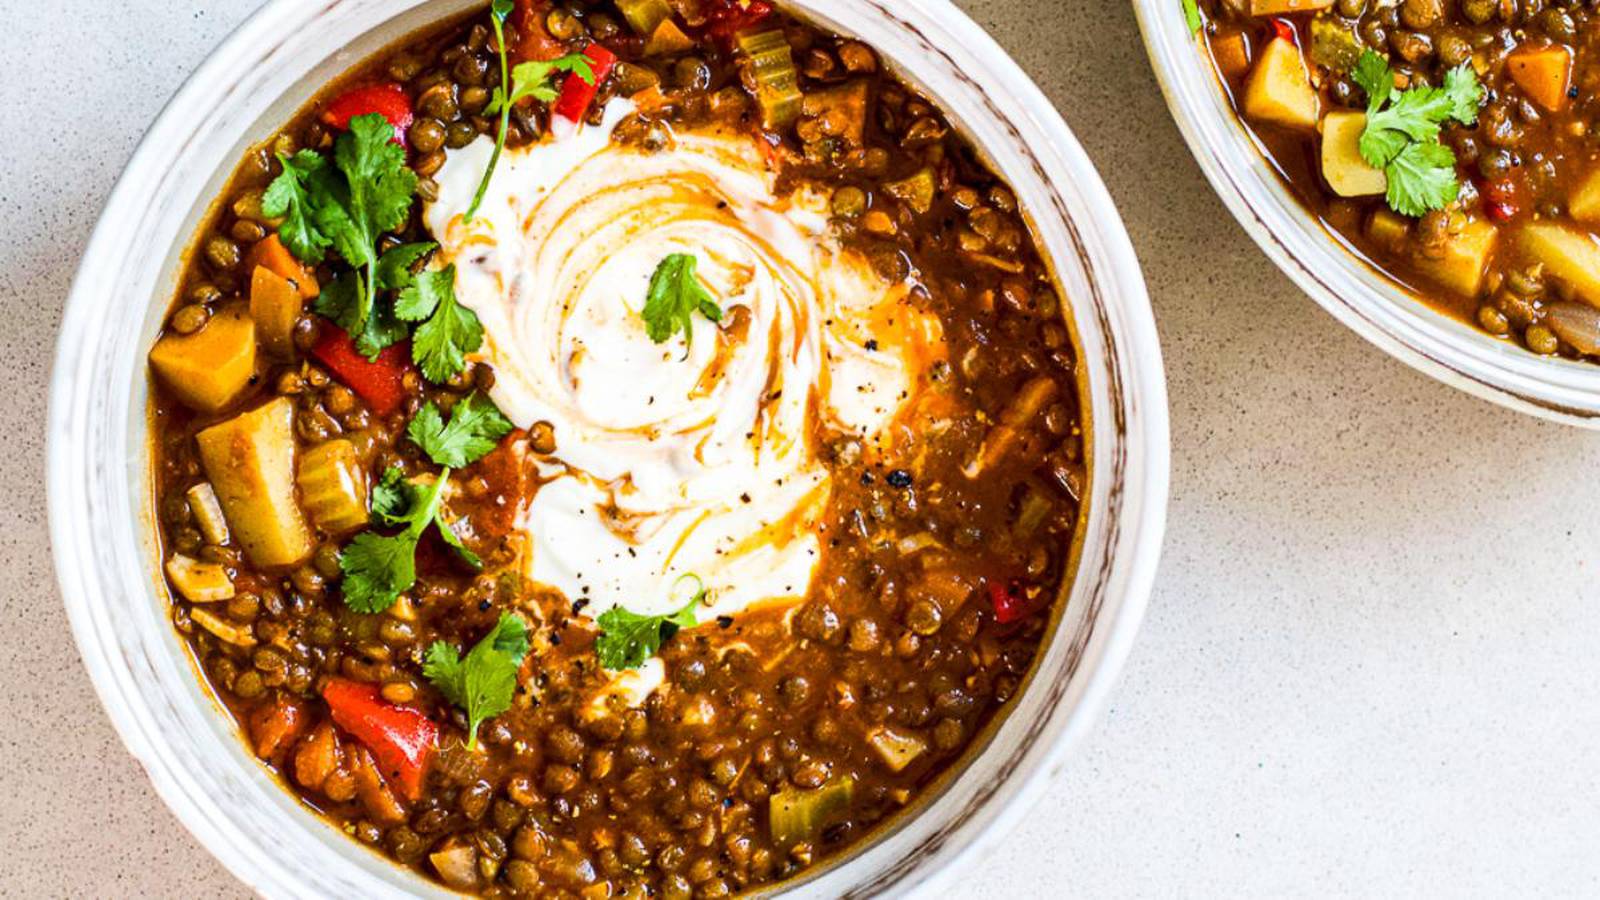 This smoky lentil stew is one-pot comfort-food perfection – The Irish Times